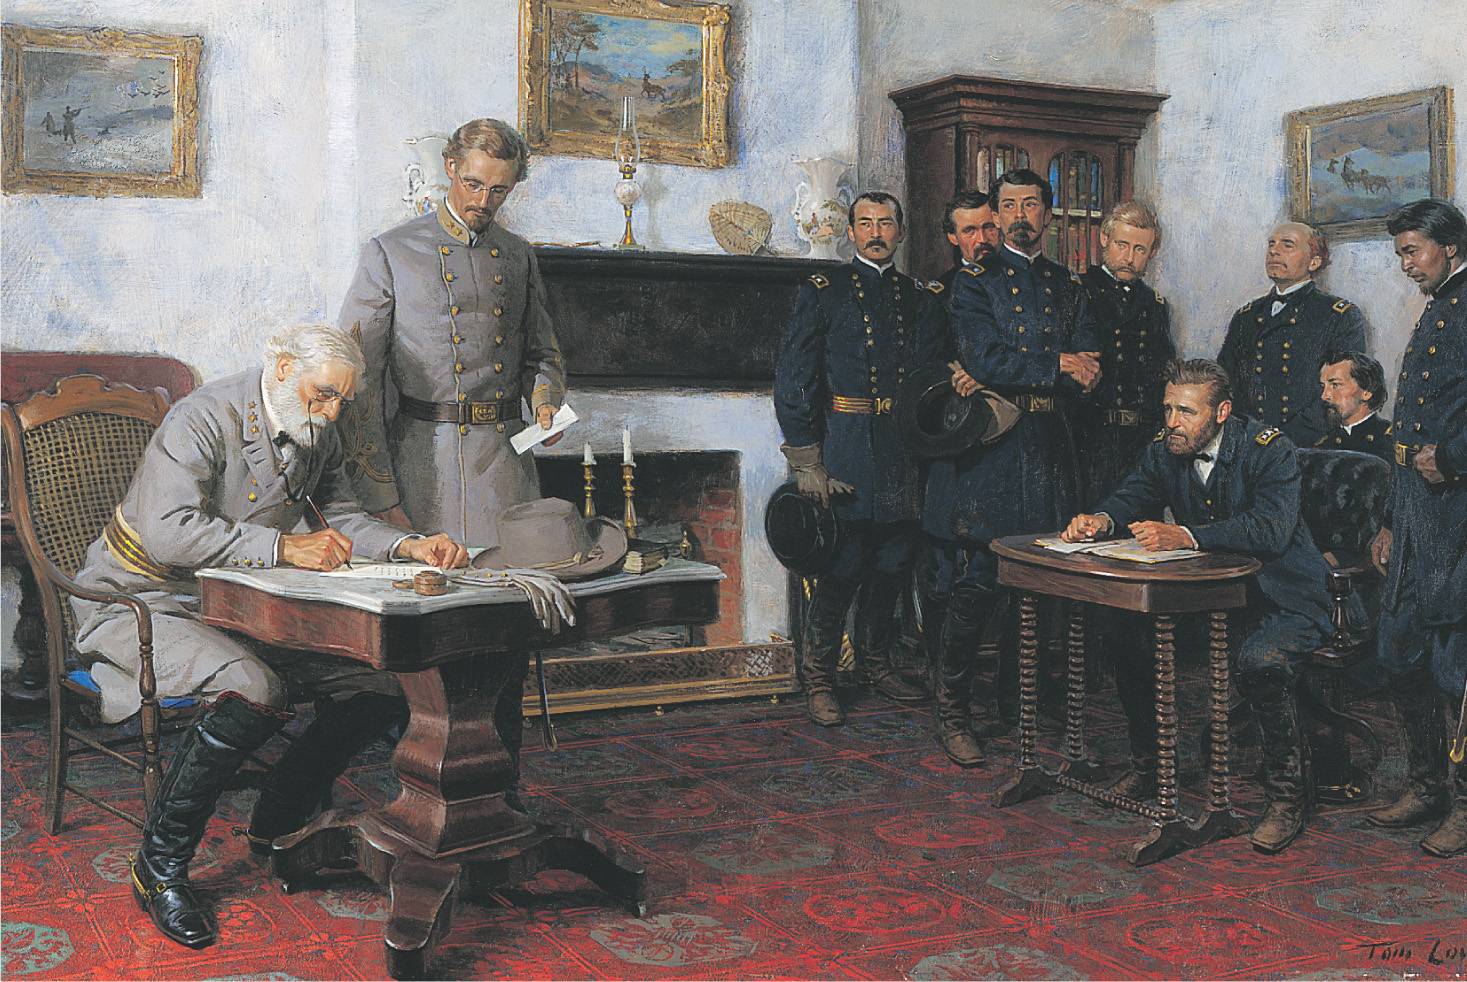 A painting: Lee sits at a desk, signing a document, as Grant and his officers watch frm across the room.